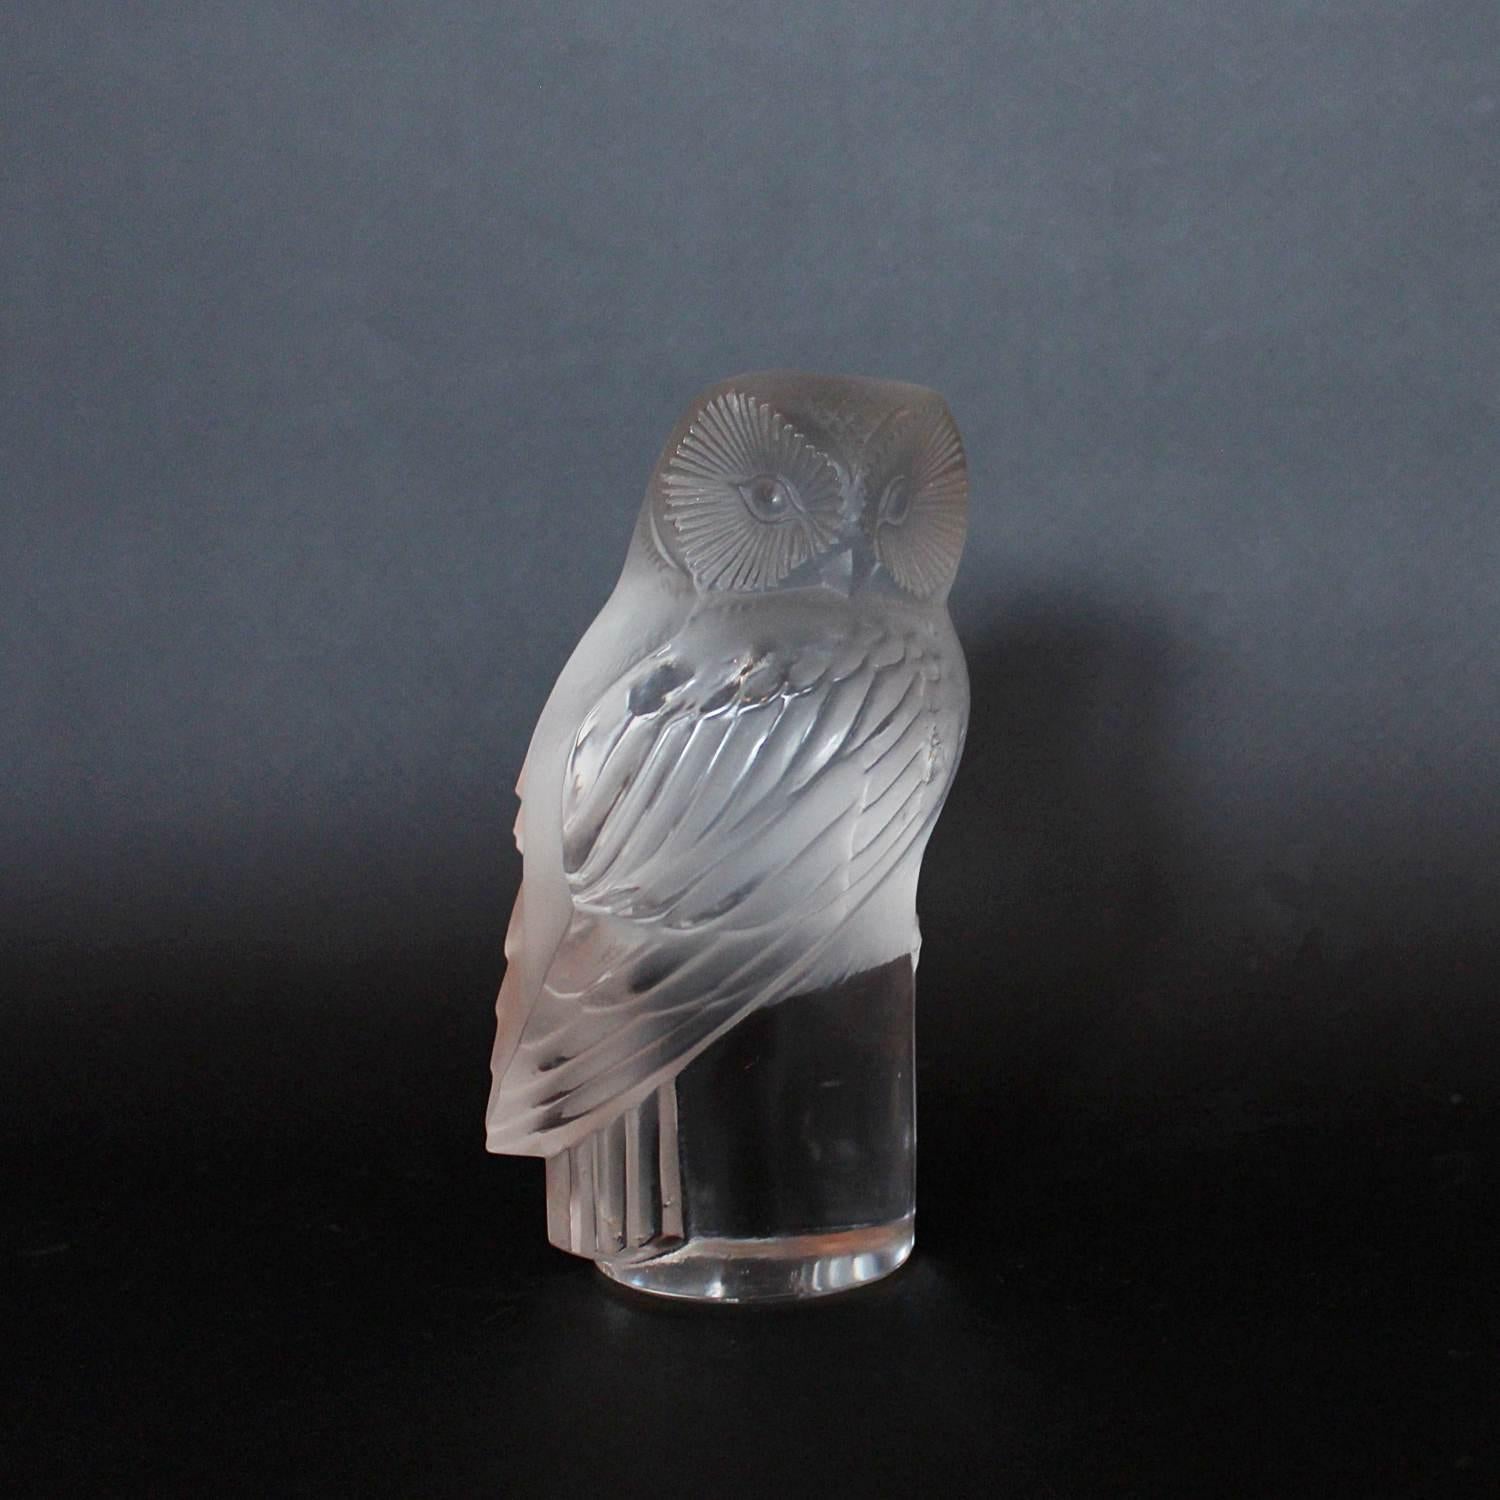 Chouette, an Art Deco glass paperweight. A frosted and clear glass paperweight in the form of a curious owl set over a clear glass base. Model no. 1193 . Literature: Marcilhac, R Lalique Catalogue Raisonné de L’Œuvre de Verre p.391

Stencil etched